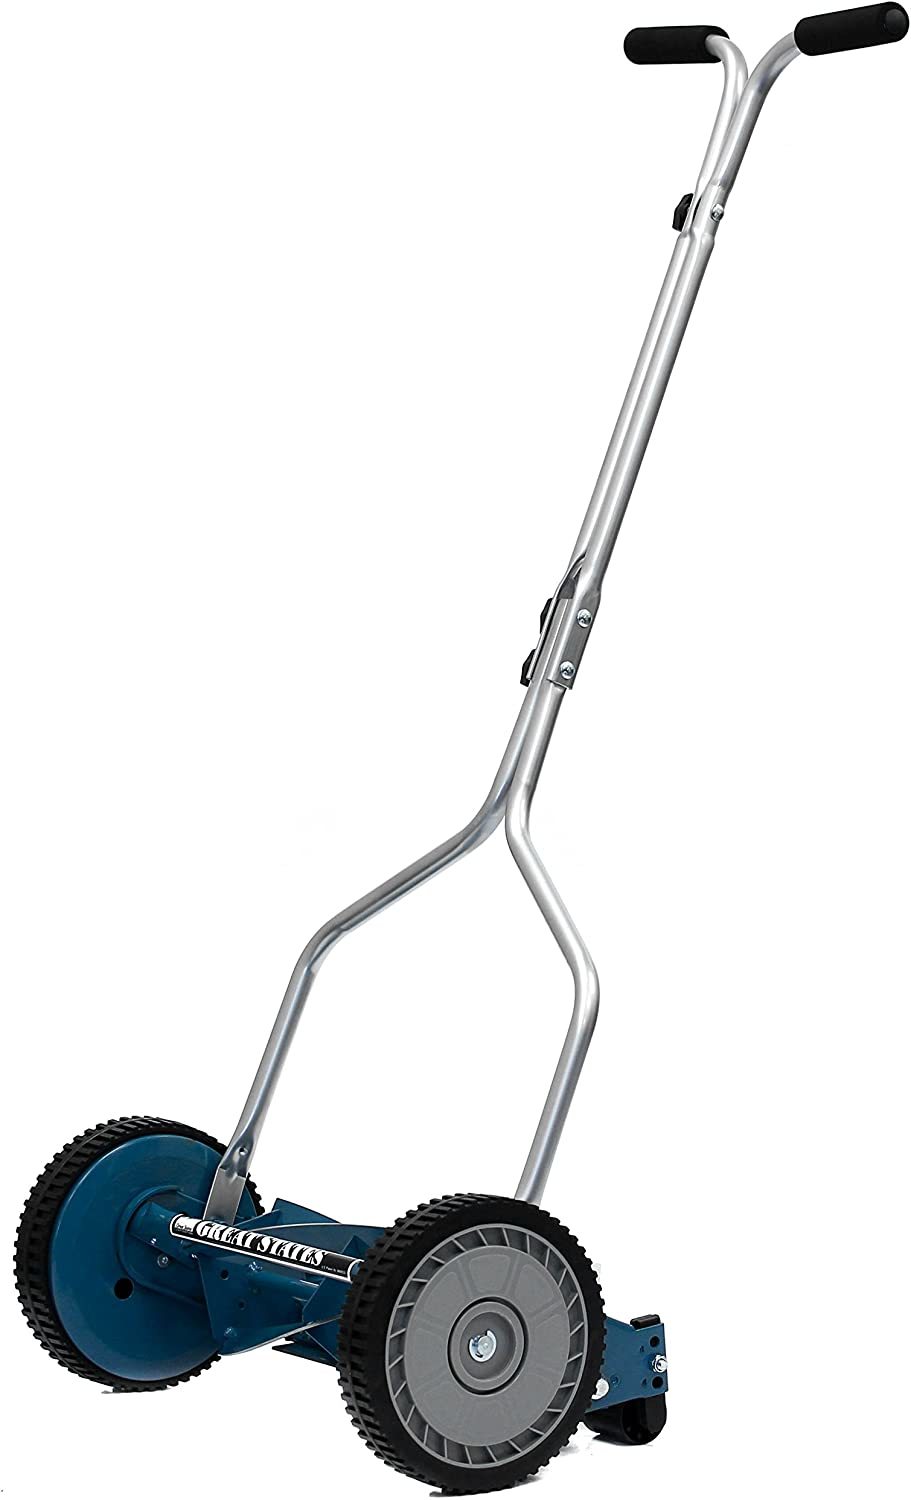 Great States 204-14 Hand Reel 14 Inch Push Lawn Mower - $116.99